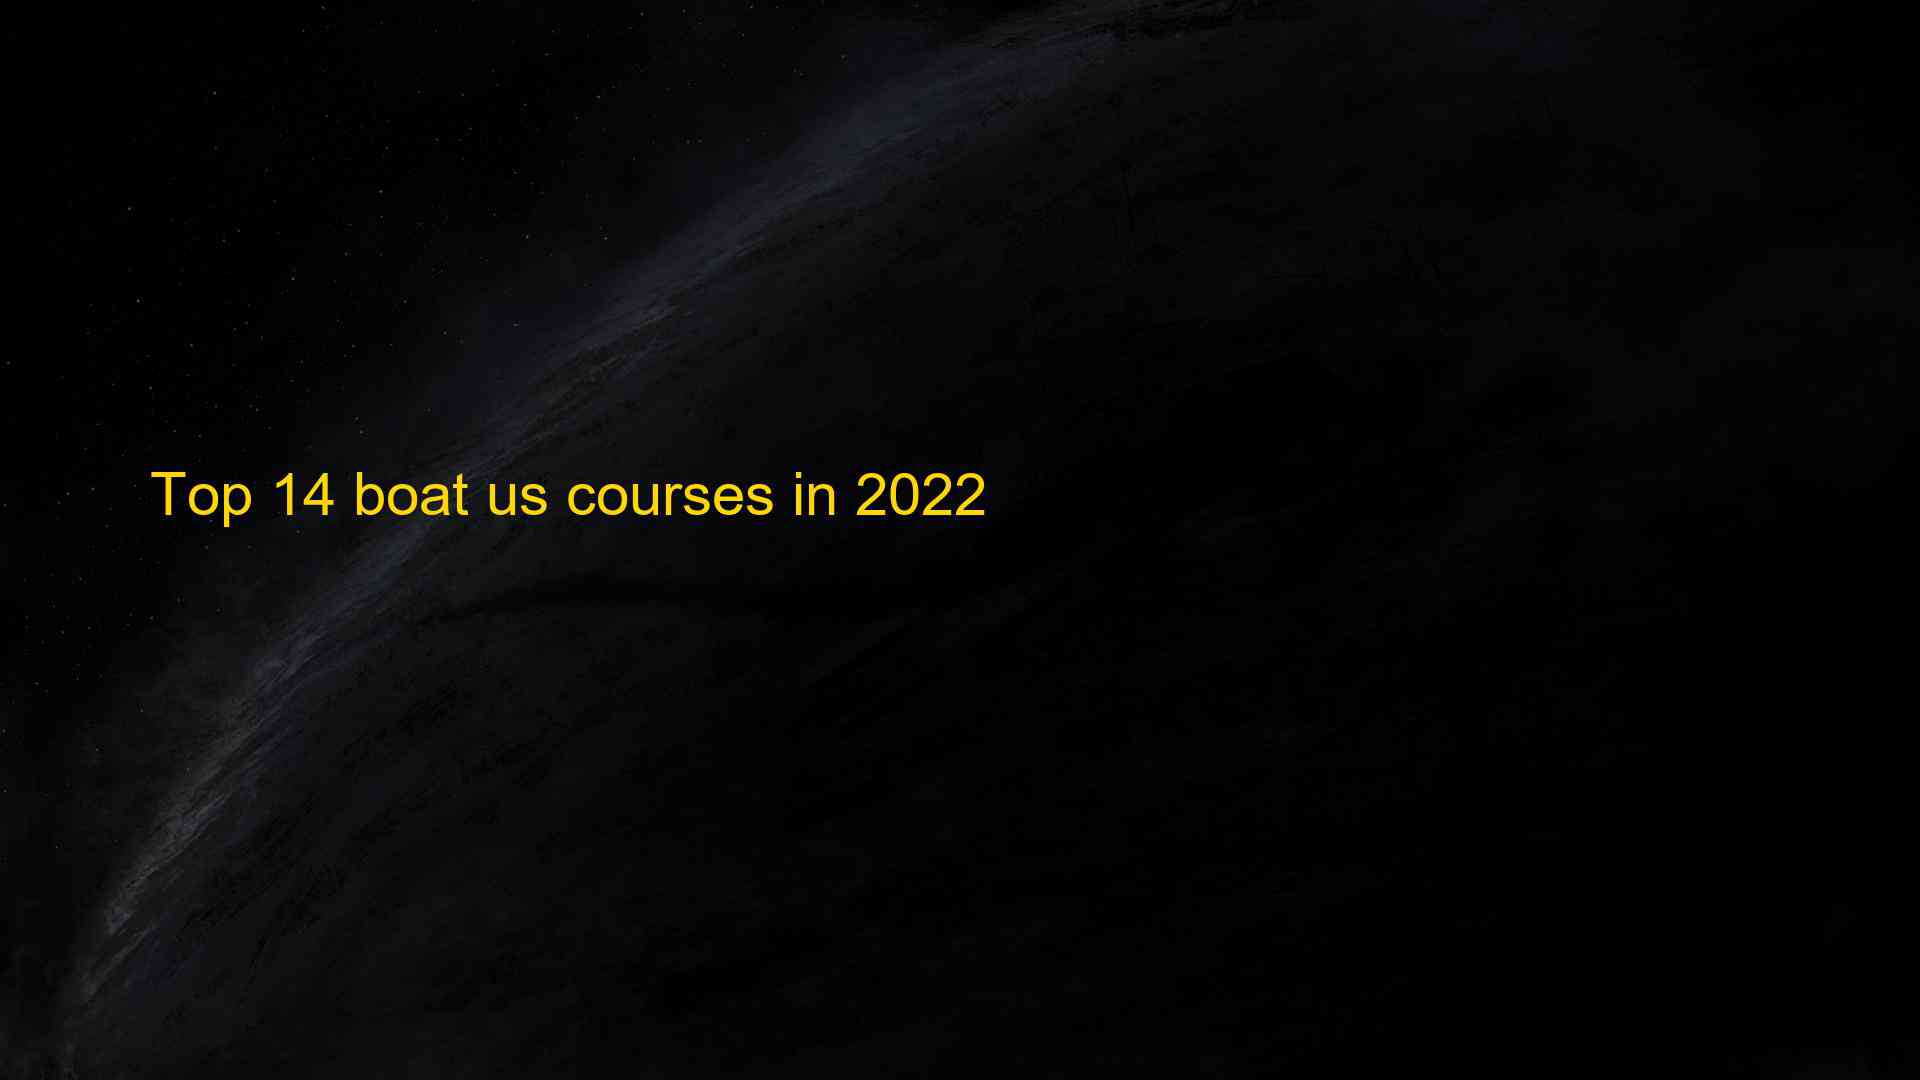 Top 14 boat us courses in 2022 1661930605